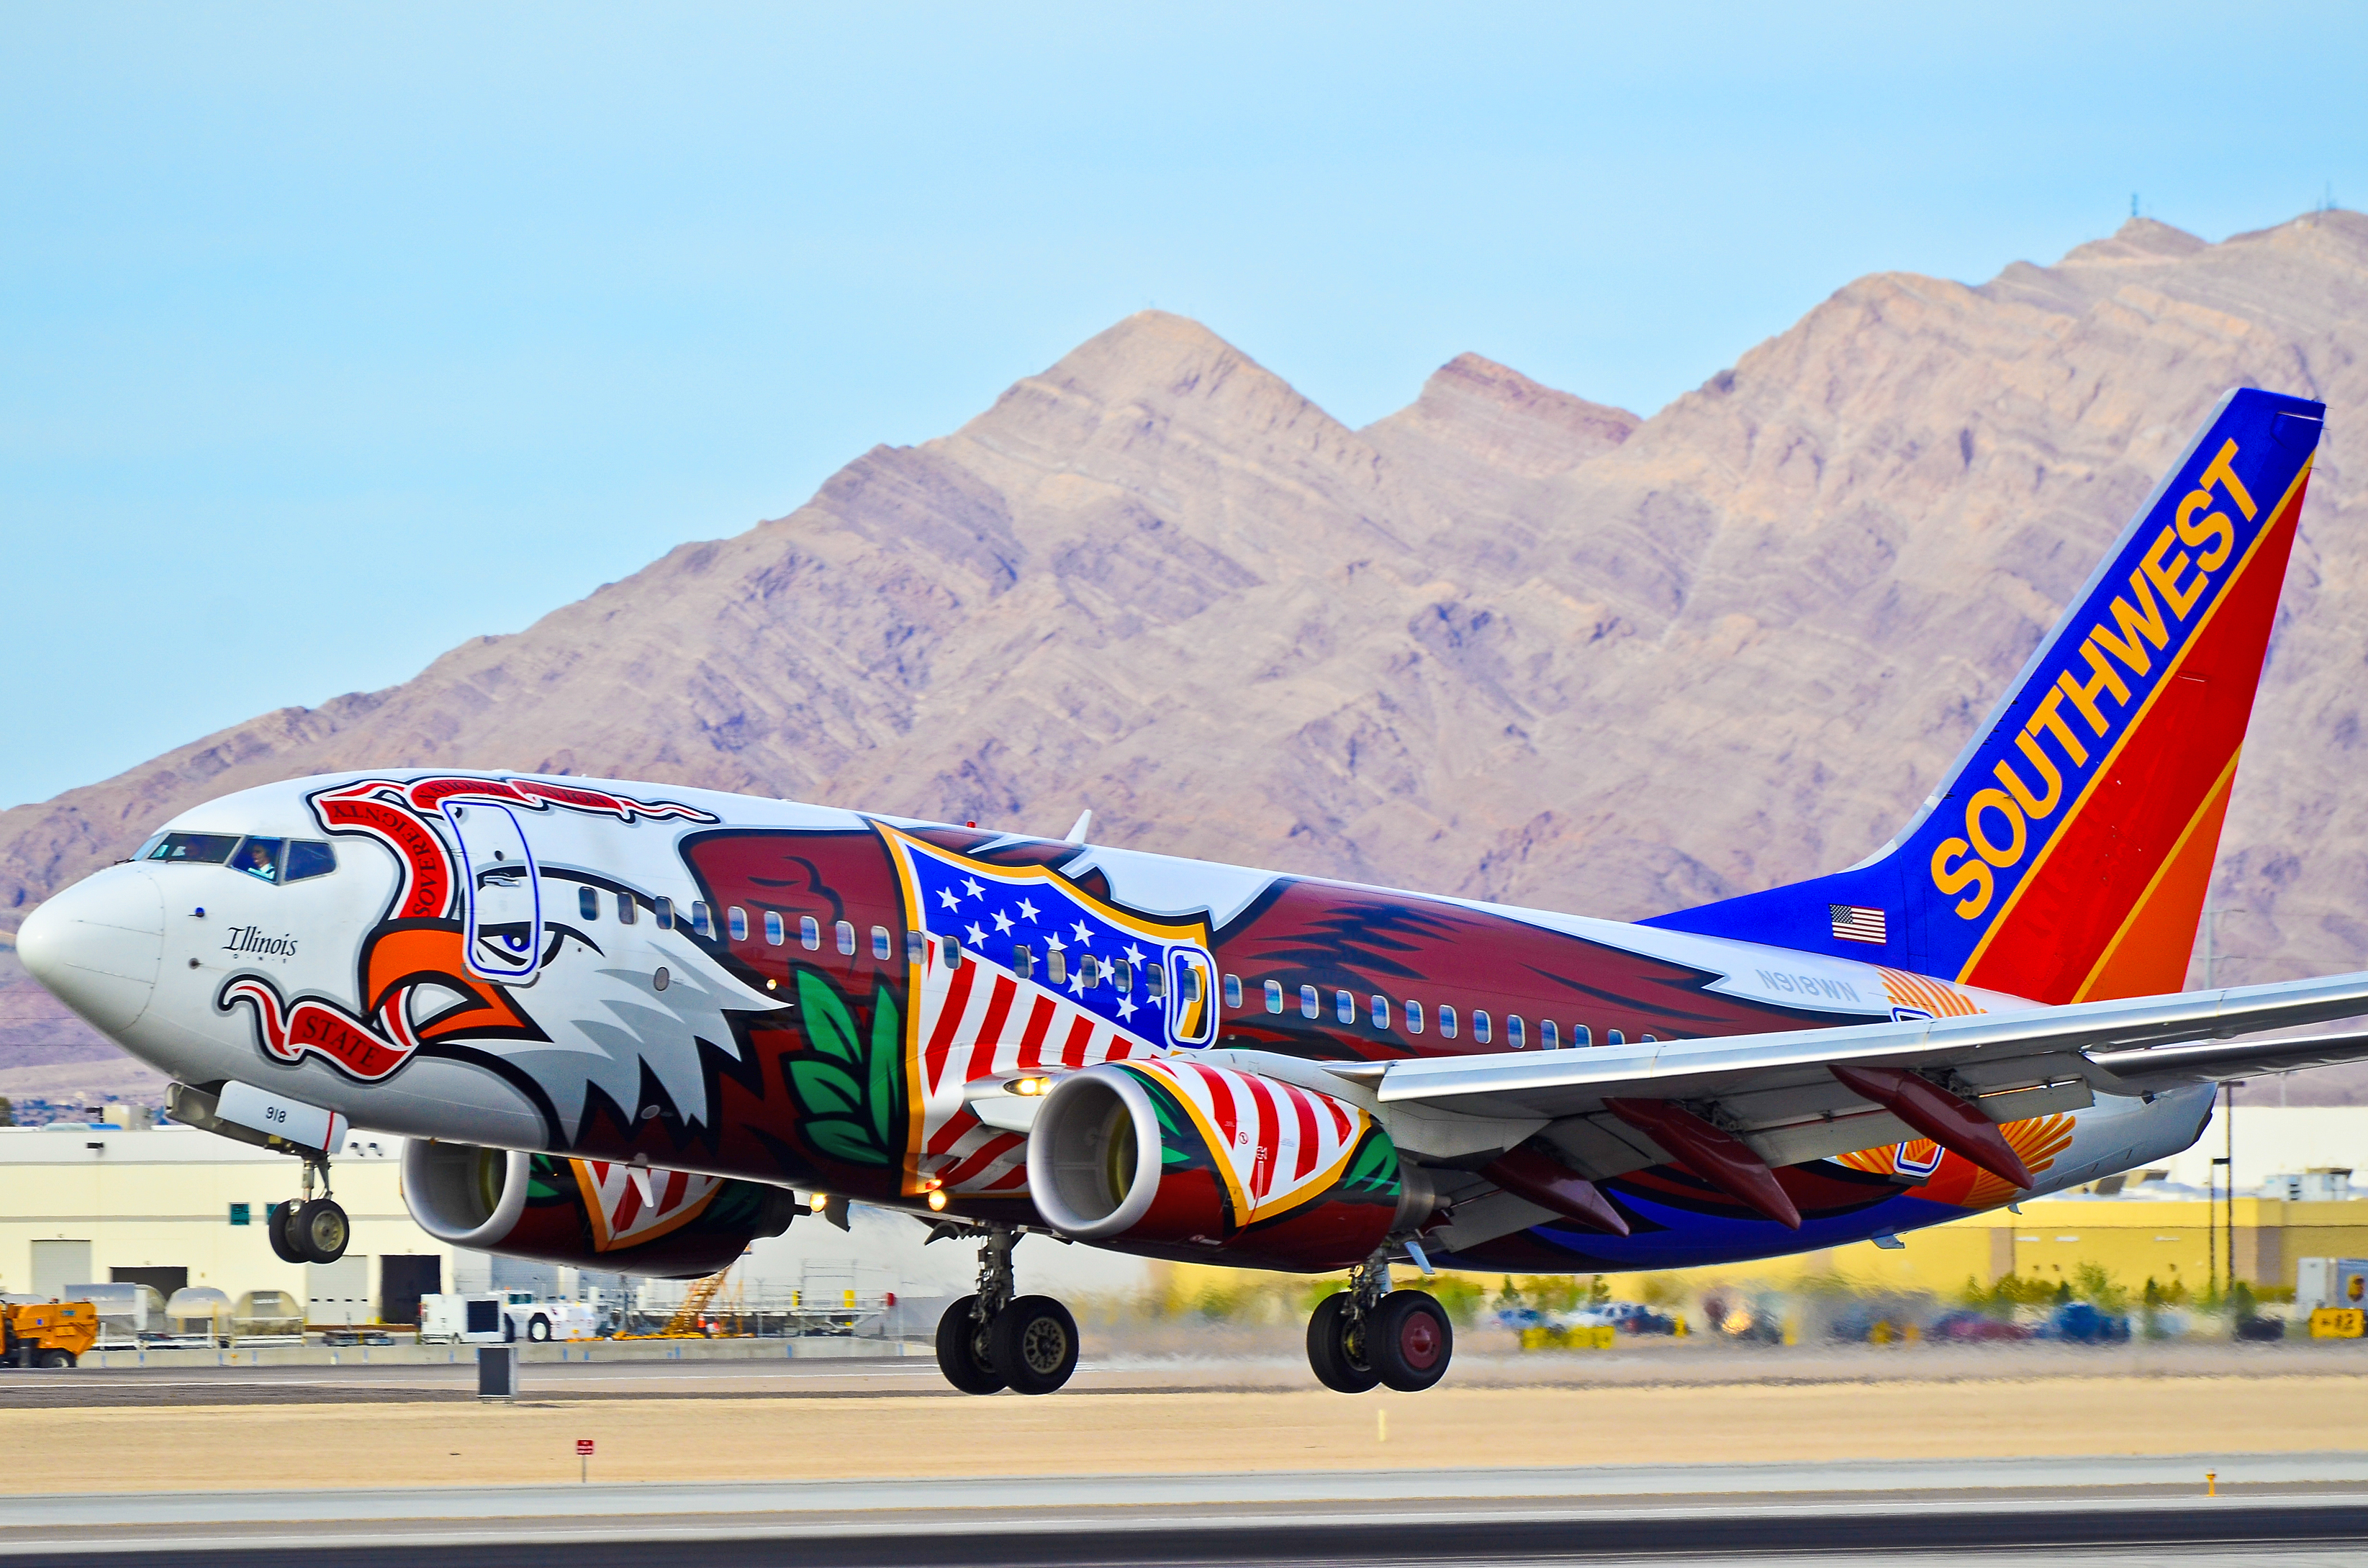 Southwest Airlines: Southwest Airline's Specialty Planes